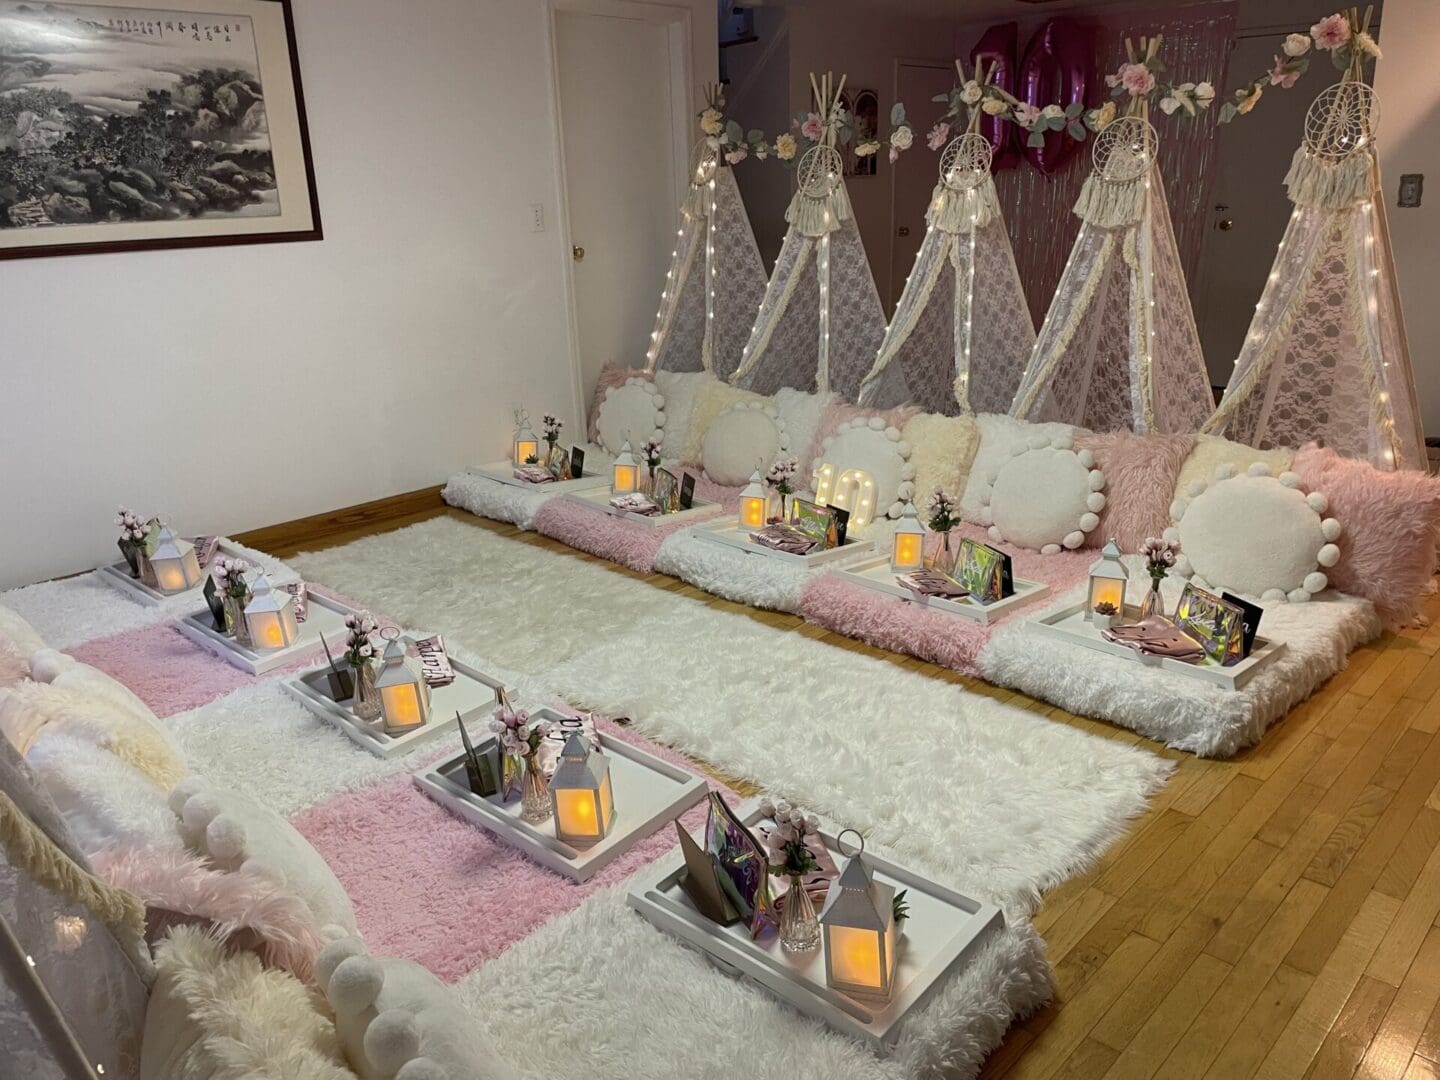 A room filled with pink and white pillows and candles.